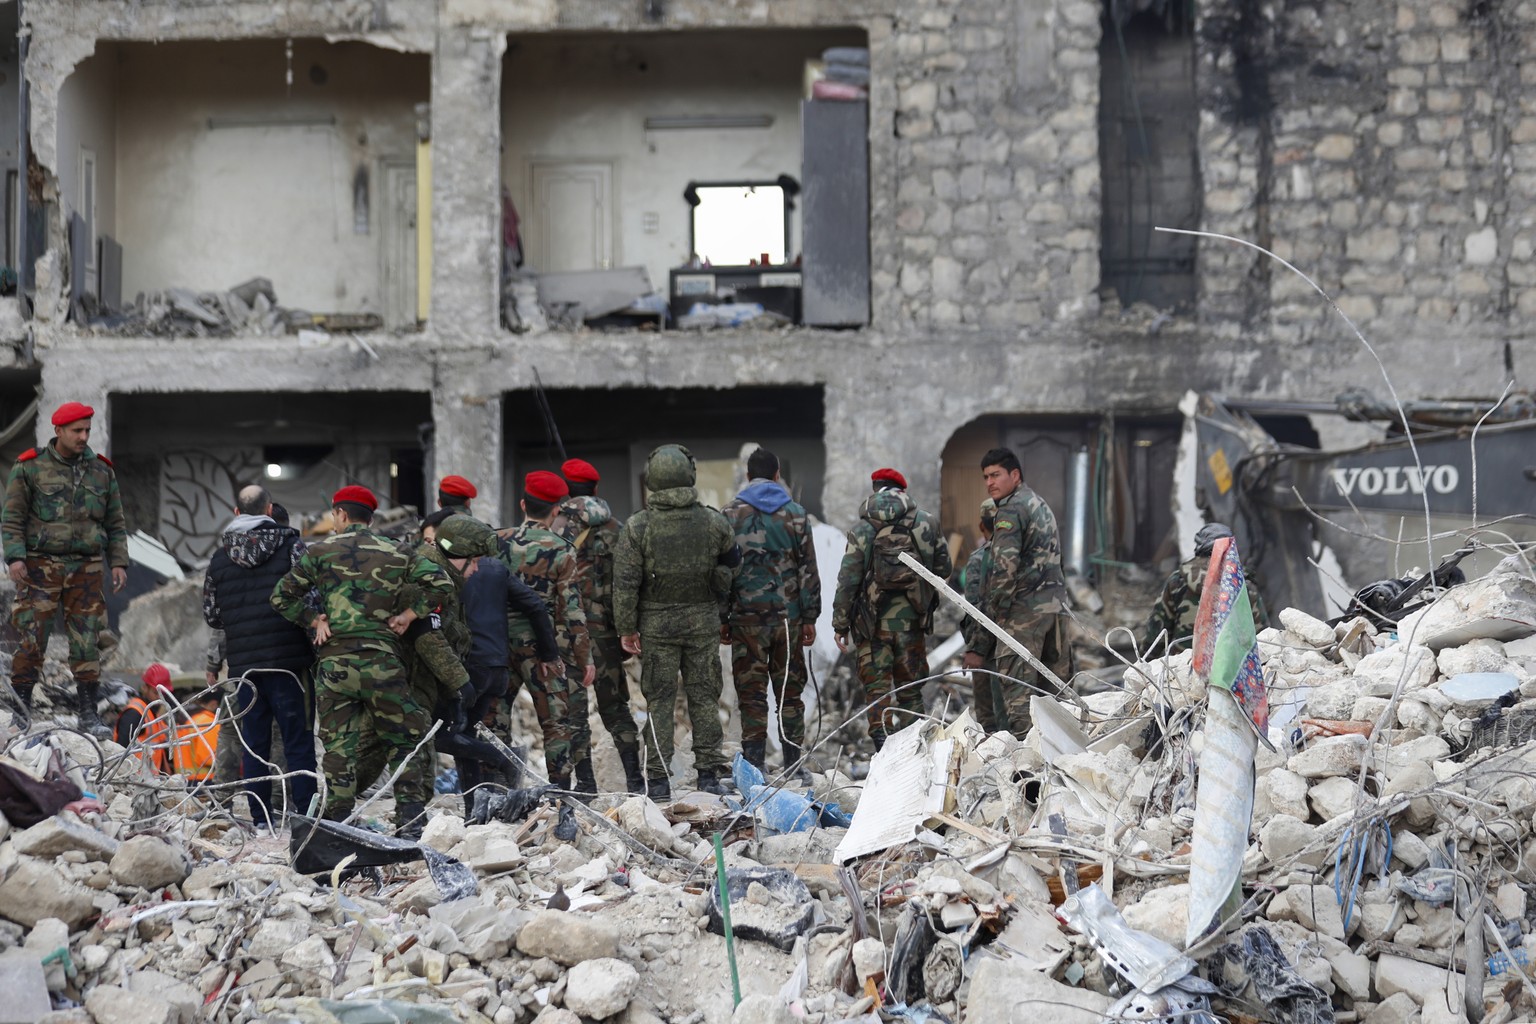 Russian soldiers and Syrian security forces inspect the wreckage of collapsed buildings, in Aleppo, Syria, Tuesday, Feb. 7, 2023. Rescuers raced Tuesday to find survivors in the rubble of thousands of ...